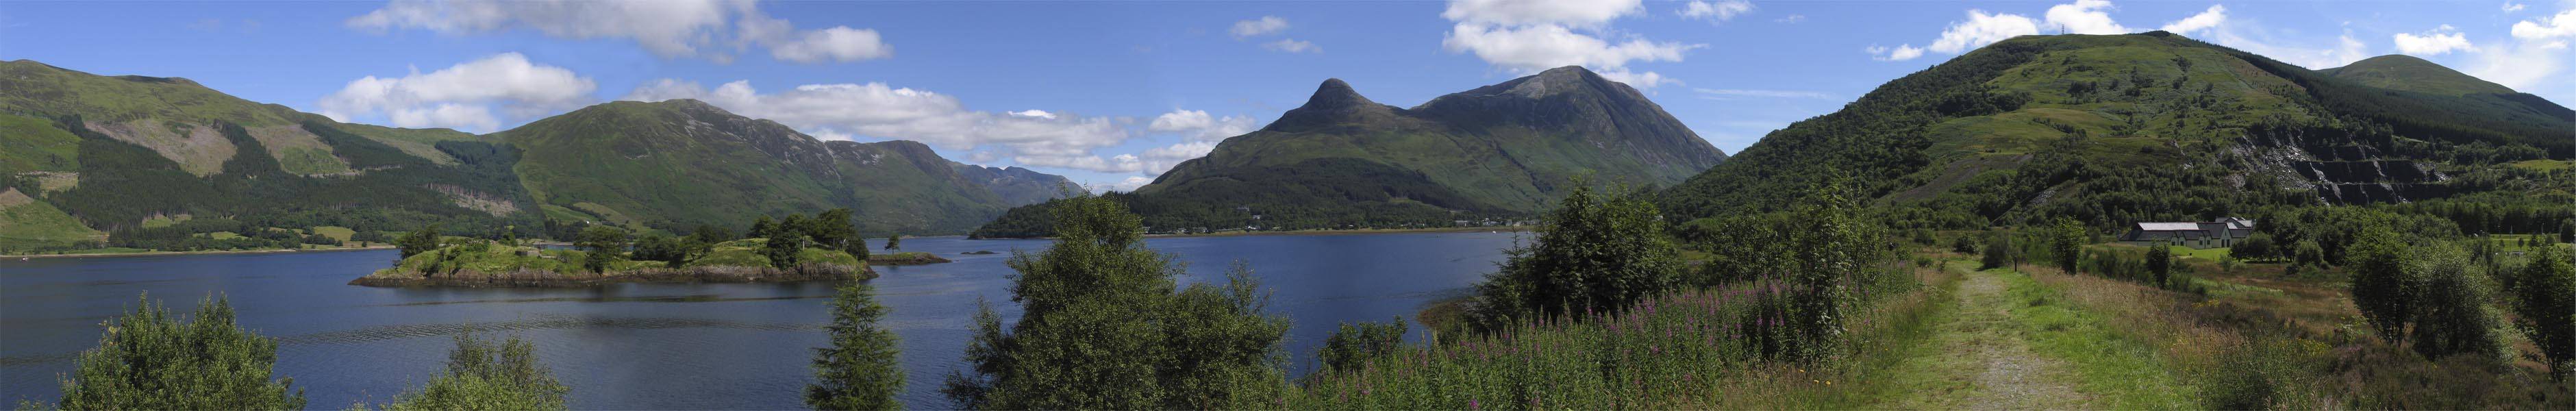 Loch Leven with the Pap of Glencoe